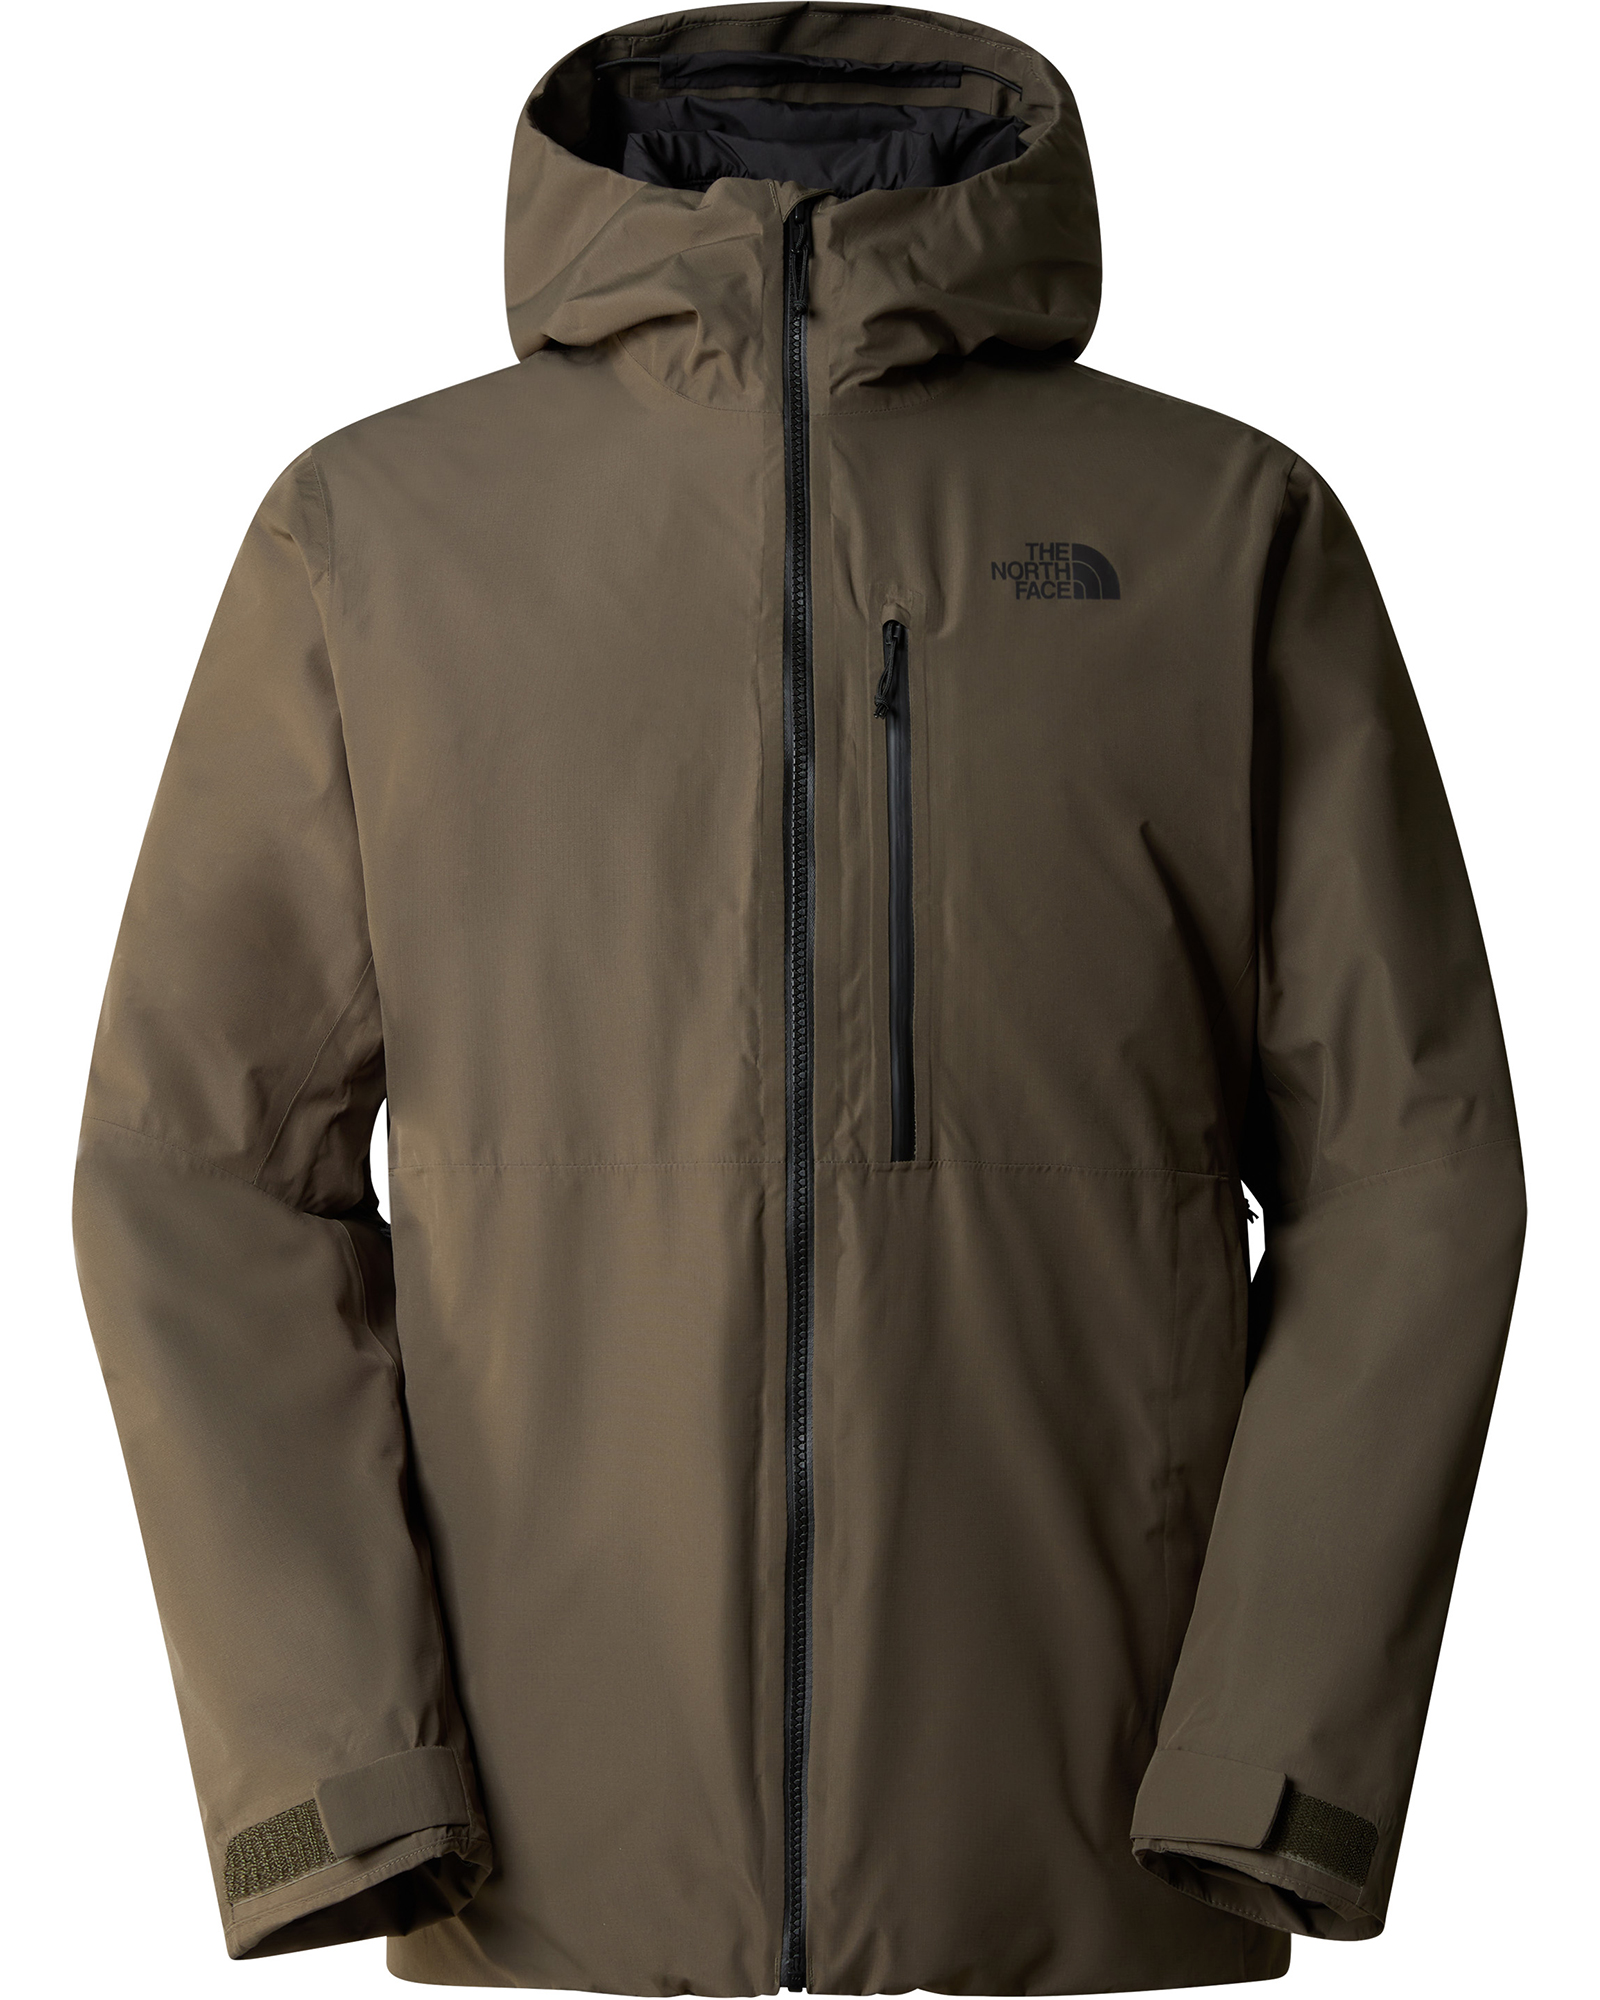 The North Face Men’s North Table Down Triclimate Jacket - New Taupe Green-TNF Black XL